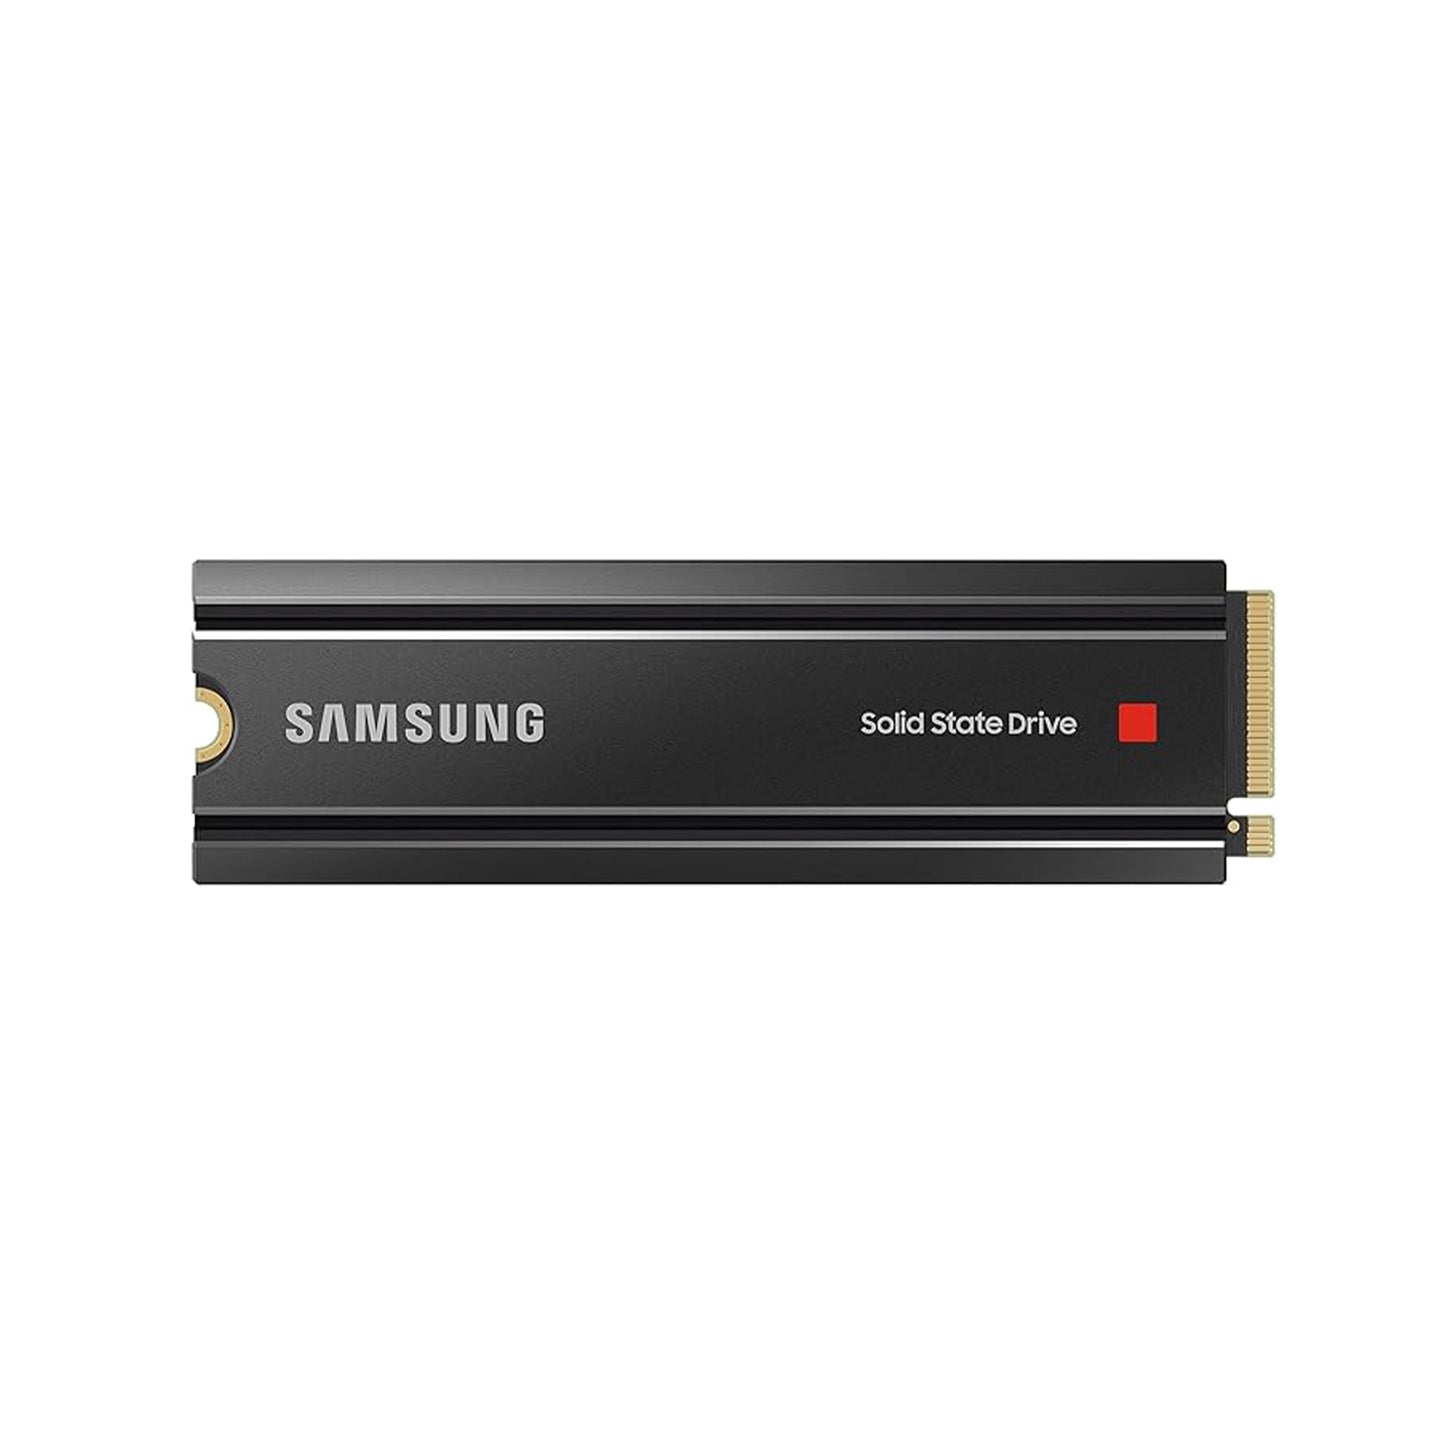 SAMSUNG 980 PRO SSD with Heatsink 2TB PCIe Gen 4 NVMe M.2 Internal Solid State Drive, Heat Control, Max Speed, PS5 Compatible (MZ-V8P2T0CW)